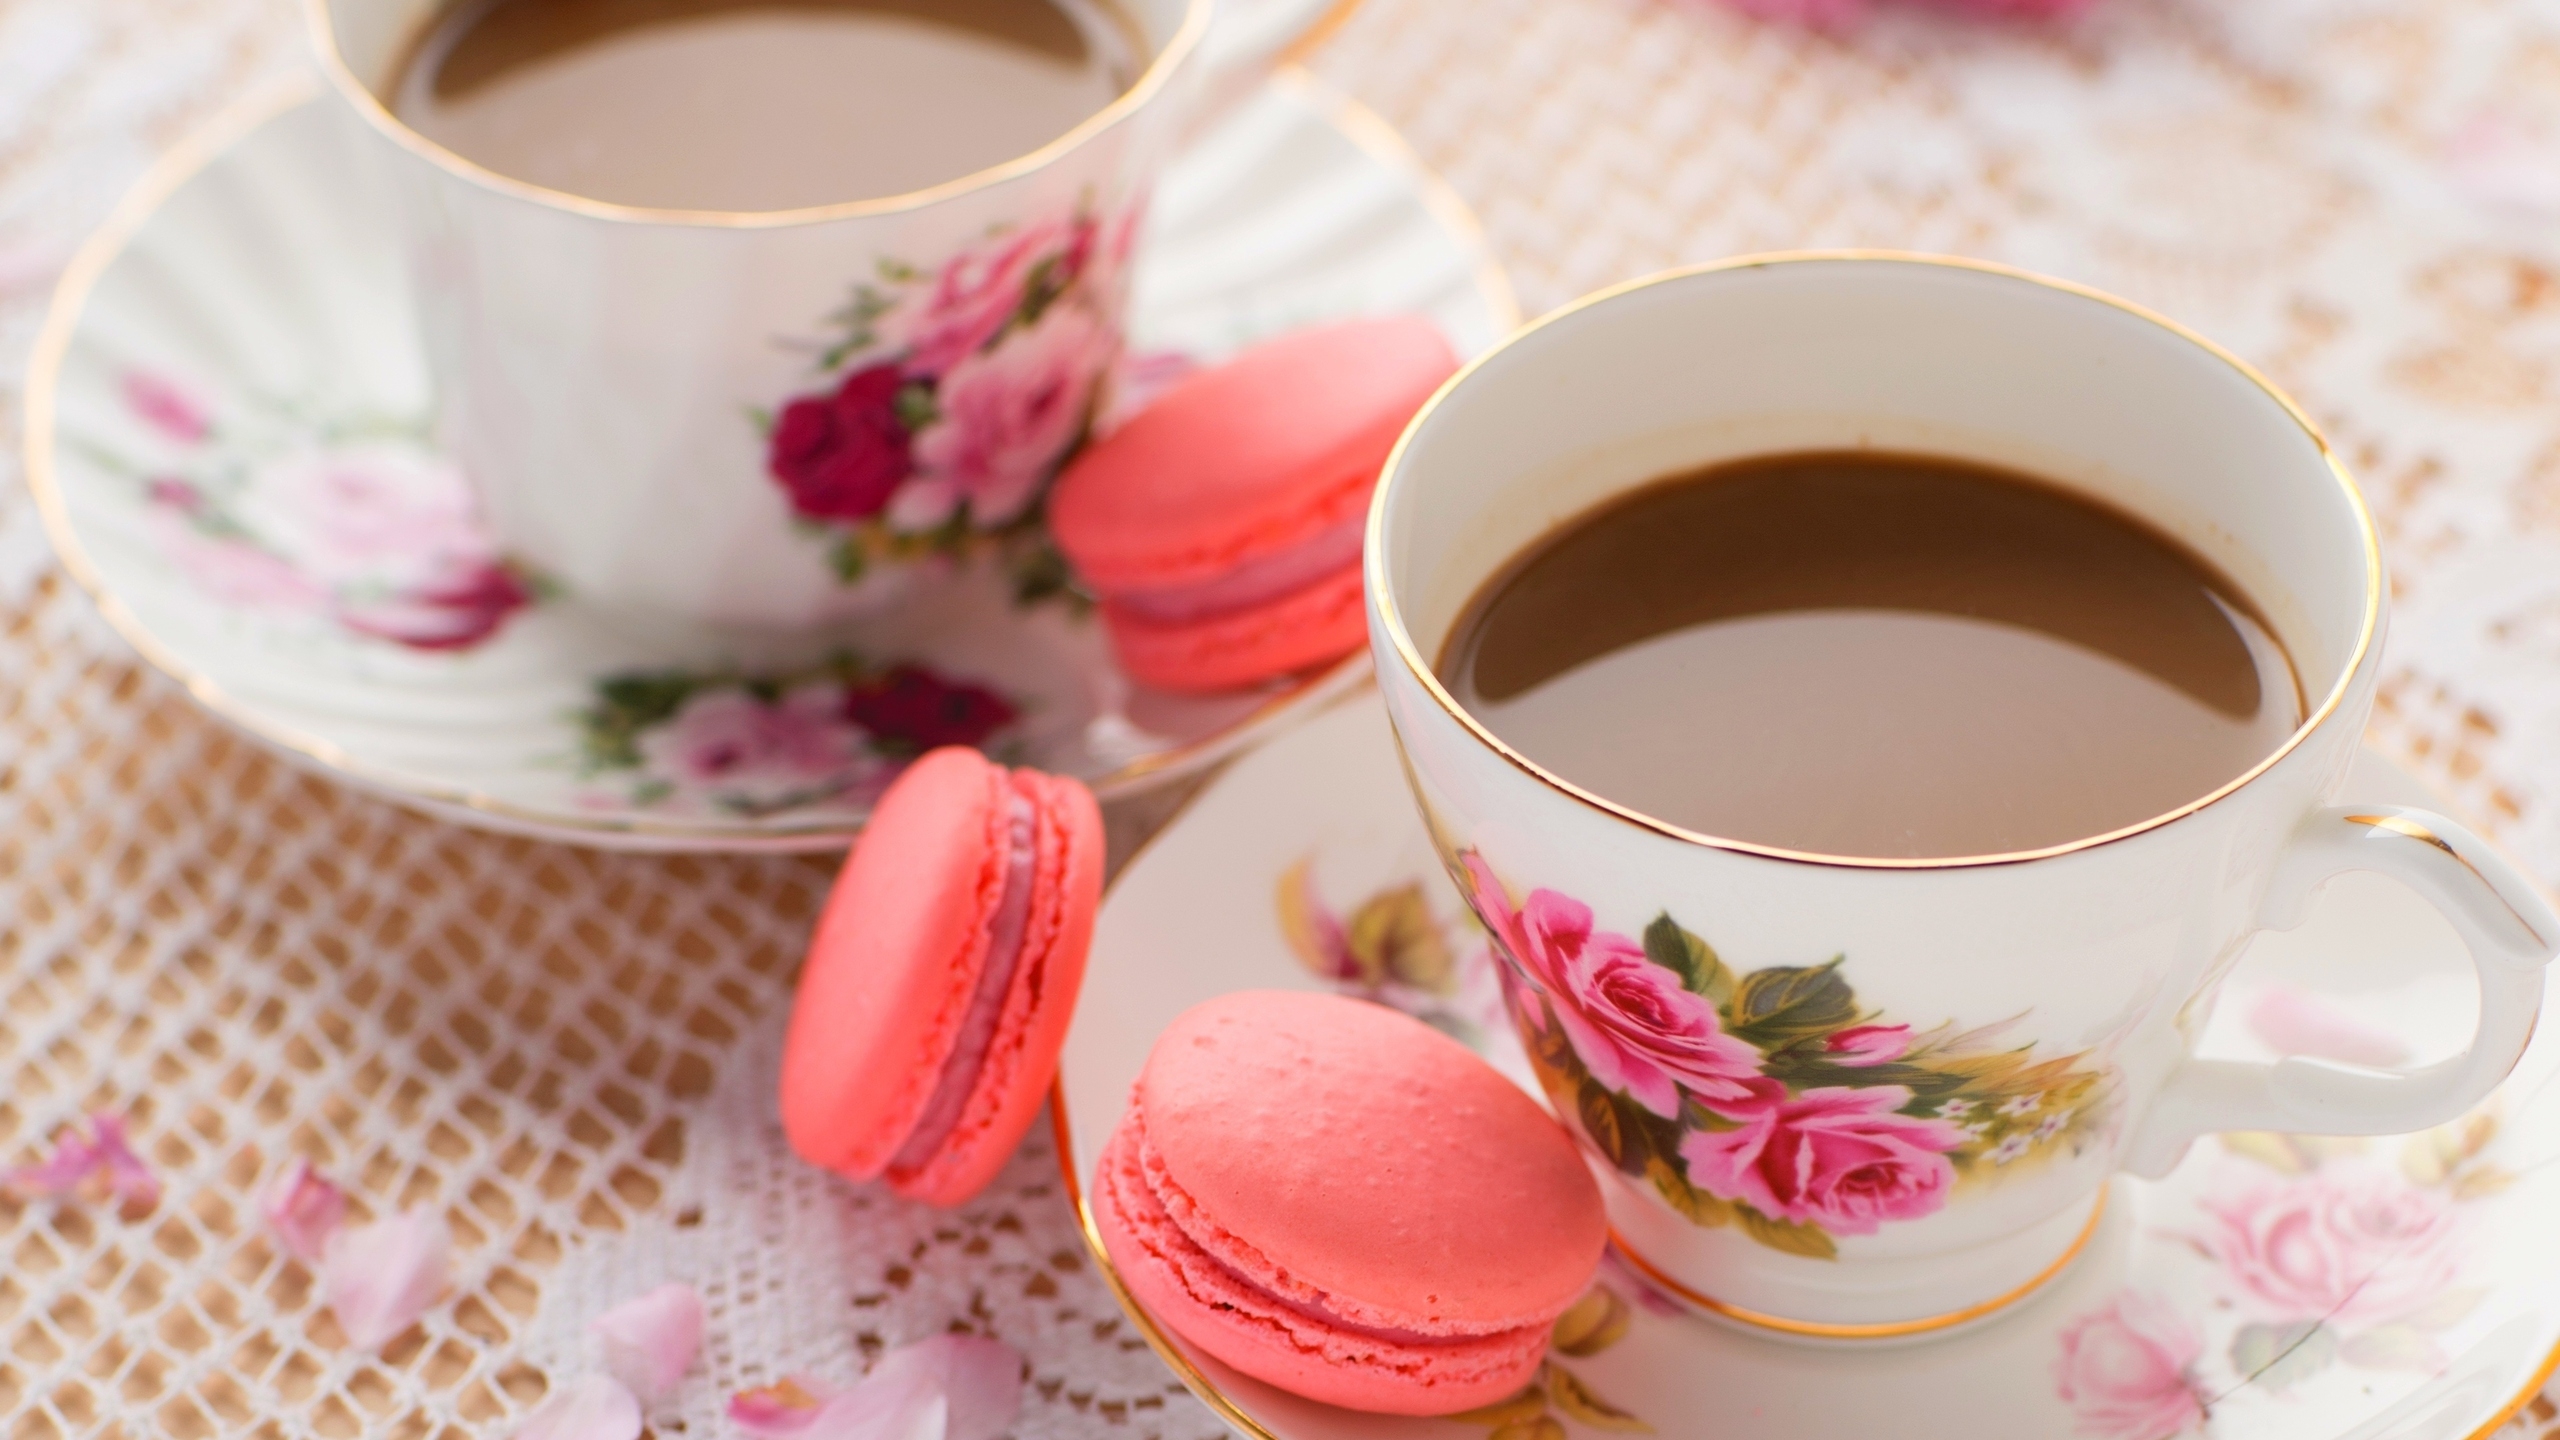 Coffee and Macaroons for 2560x1440 HDTV resolution